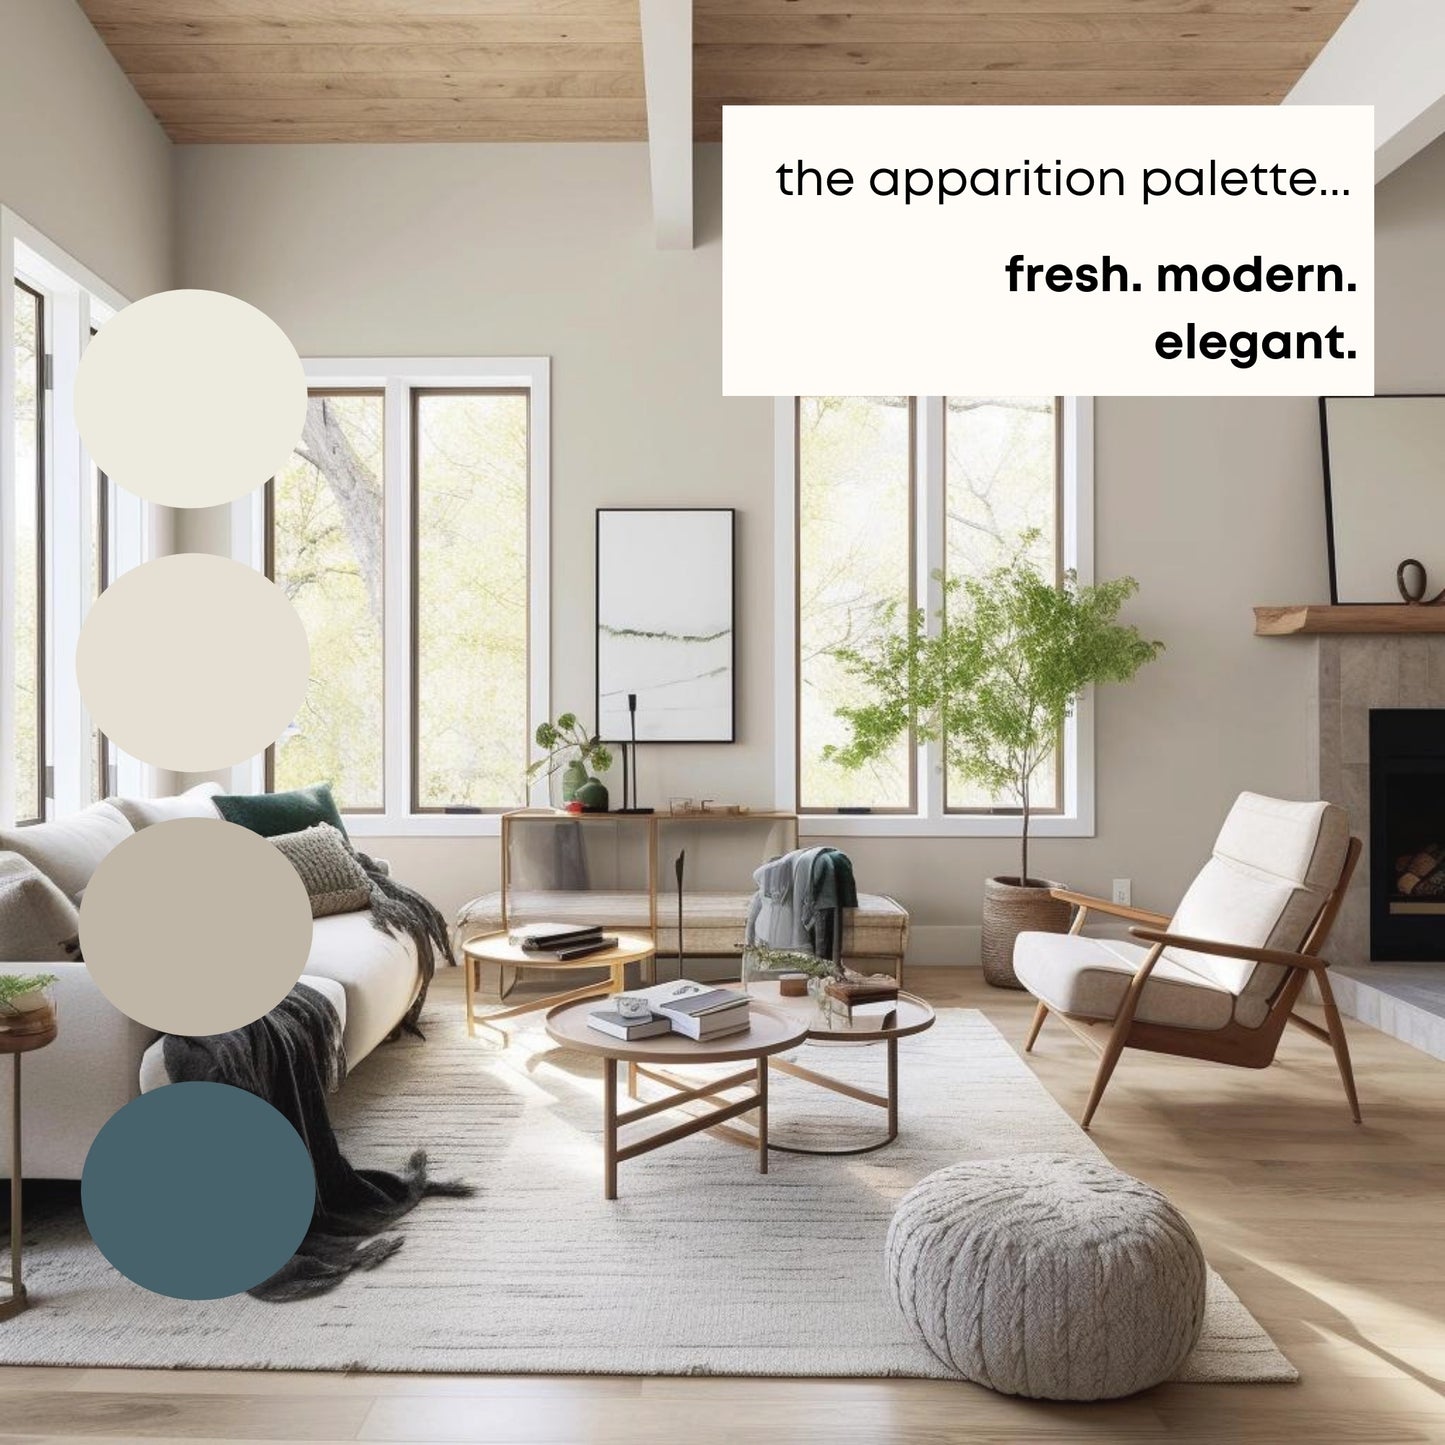 Apparition Benjamin Moore Paint Palette - Modern Neutral Interior Paint Colors for Home - Coordinating Interior Design Color Palette, Benjamin Moore Coastal